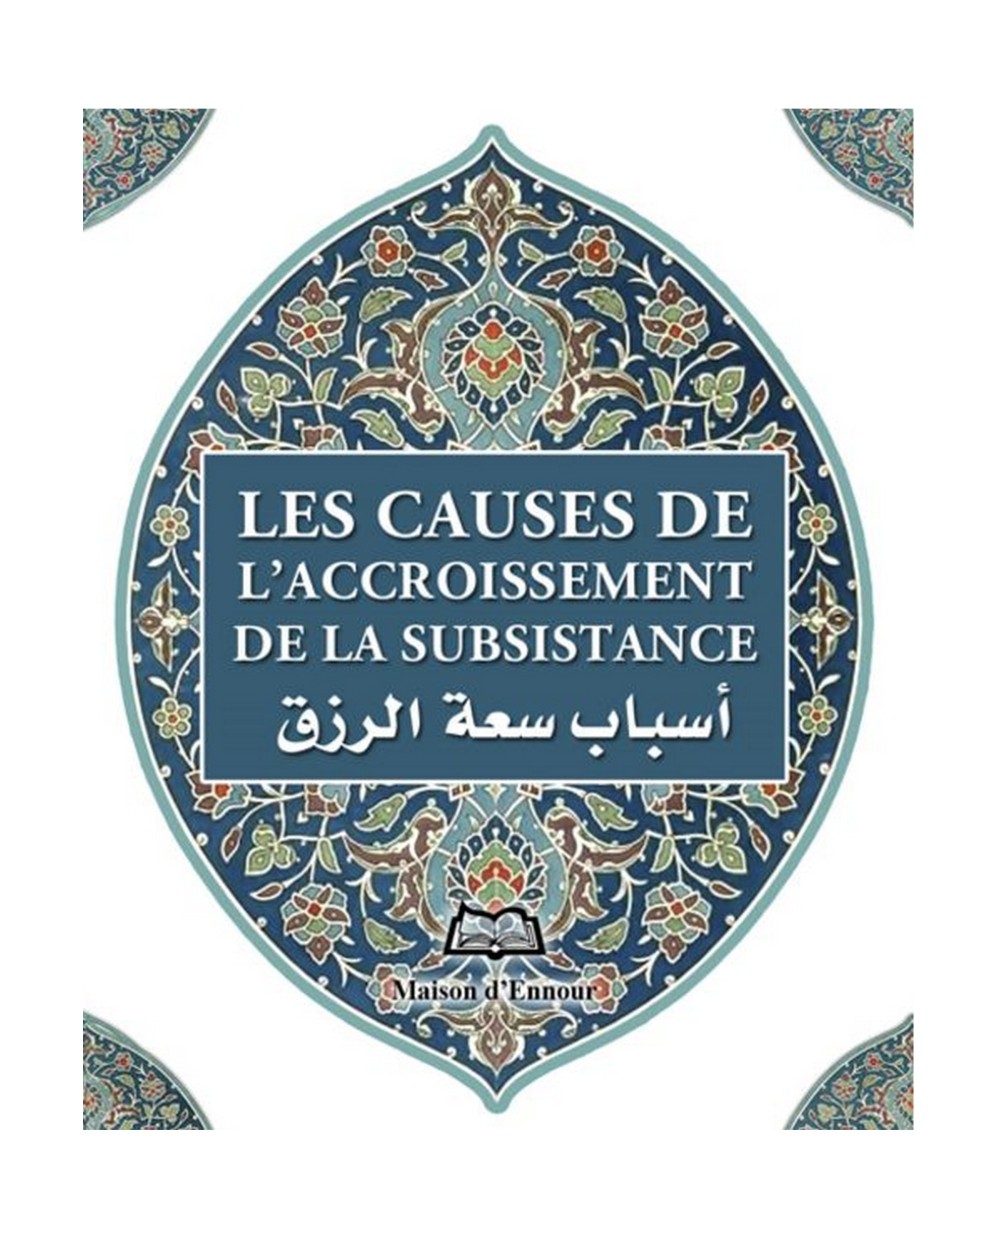 The causes of increased subsistence - Maison d'Ennour